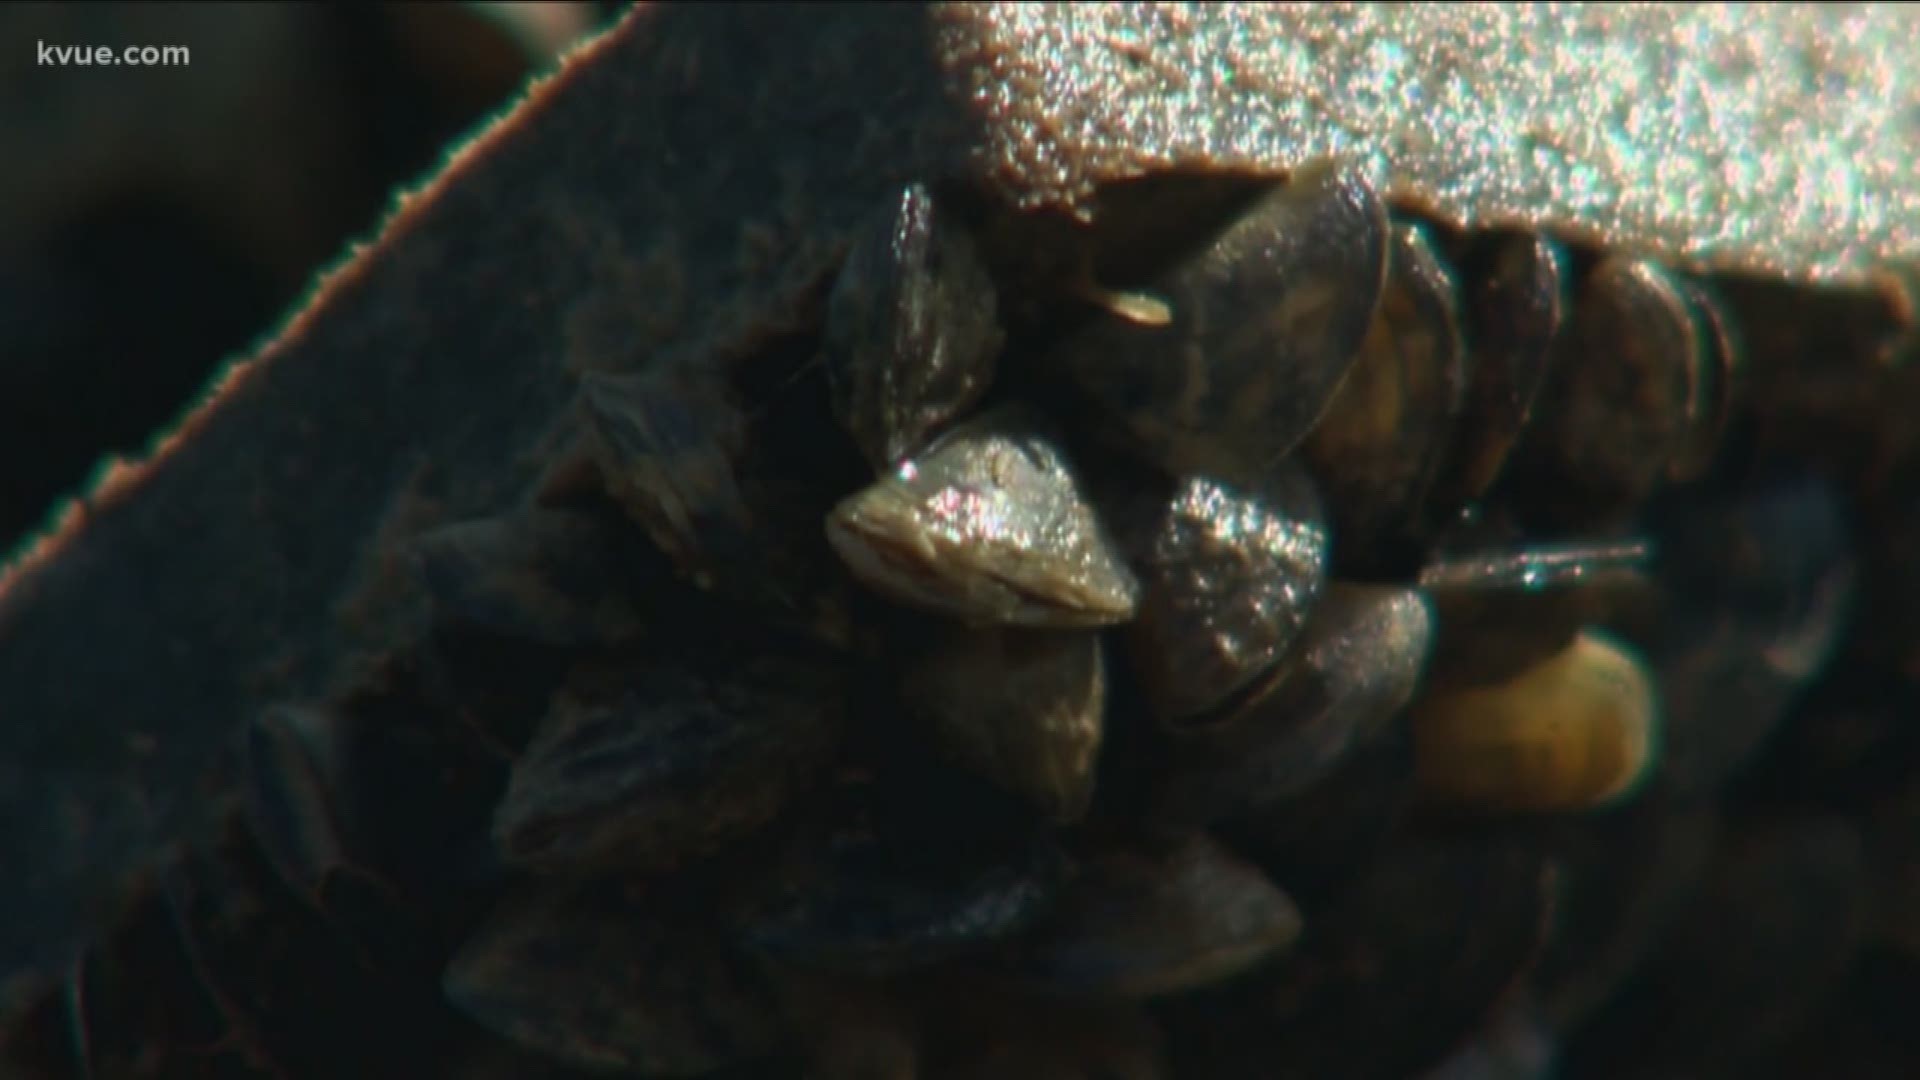 They're just the size of a dime but they're causing a big problem, infesting yet another Central Texas Lake.